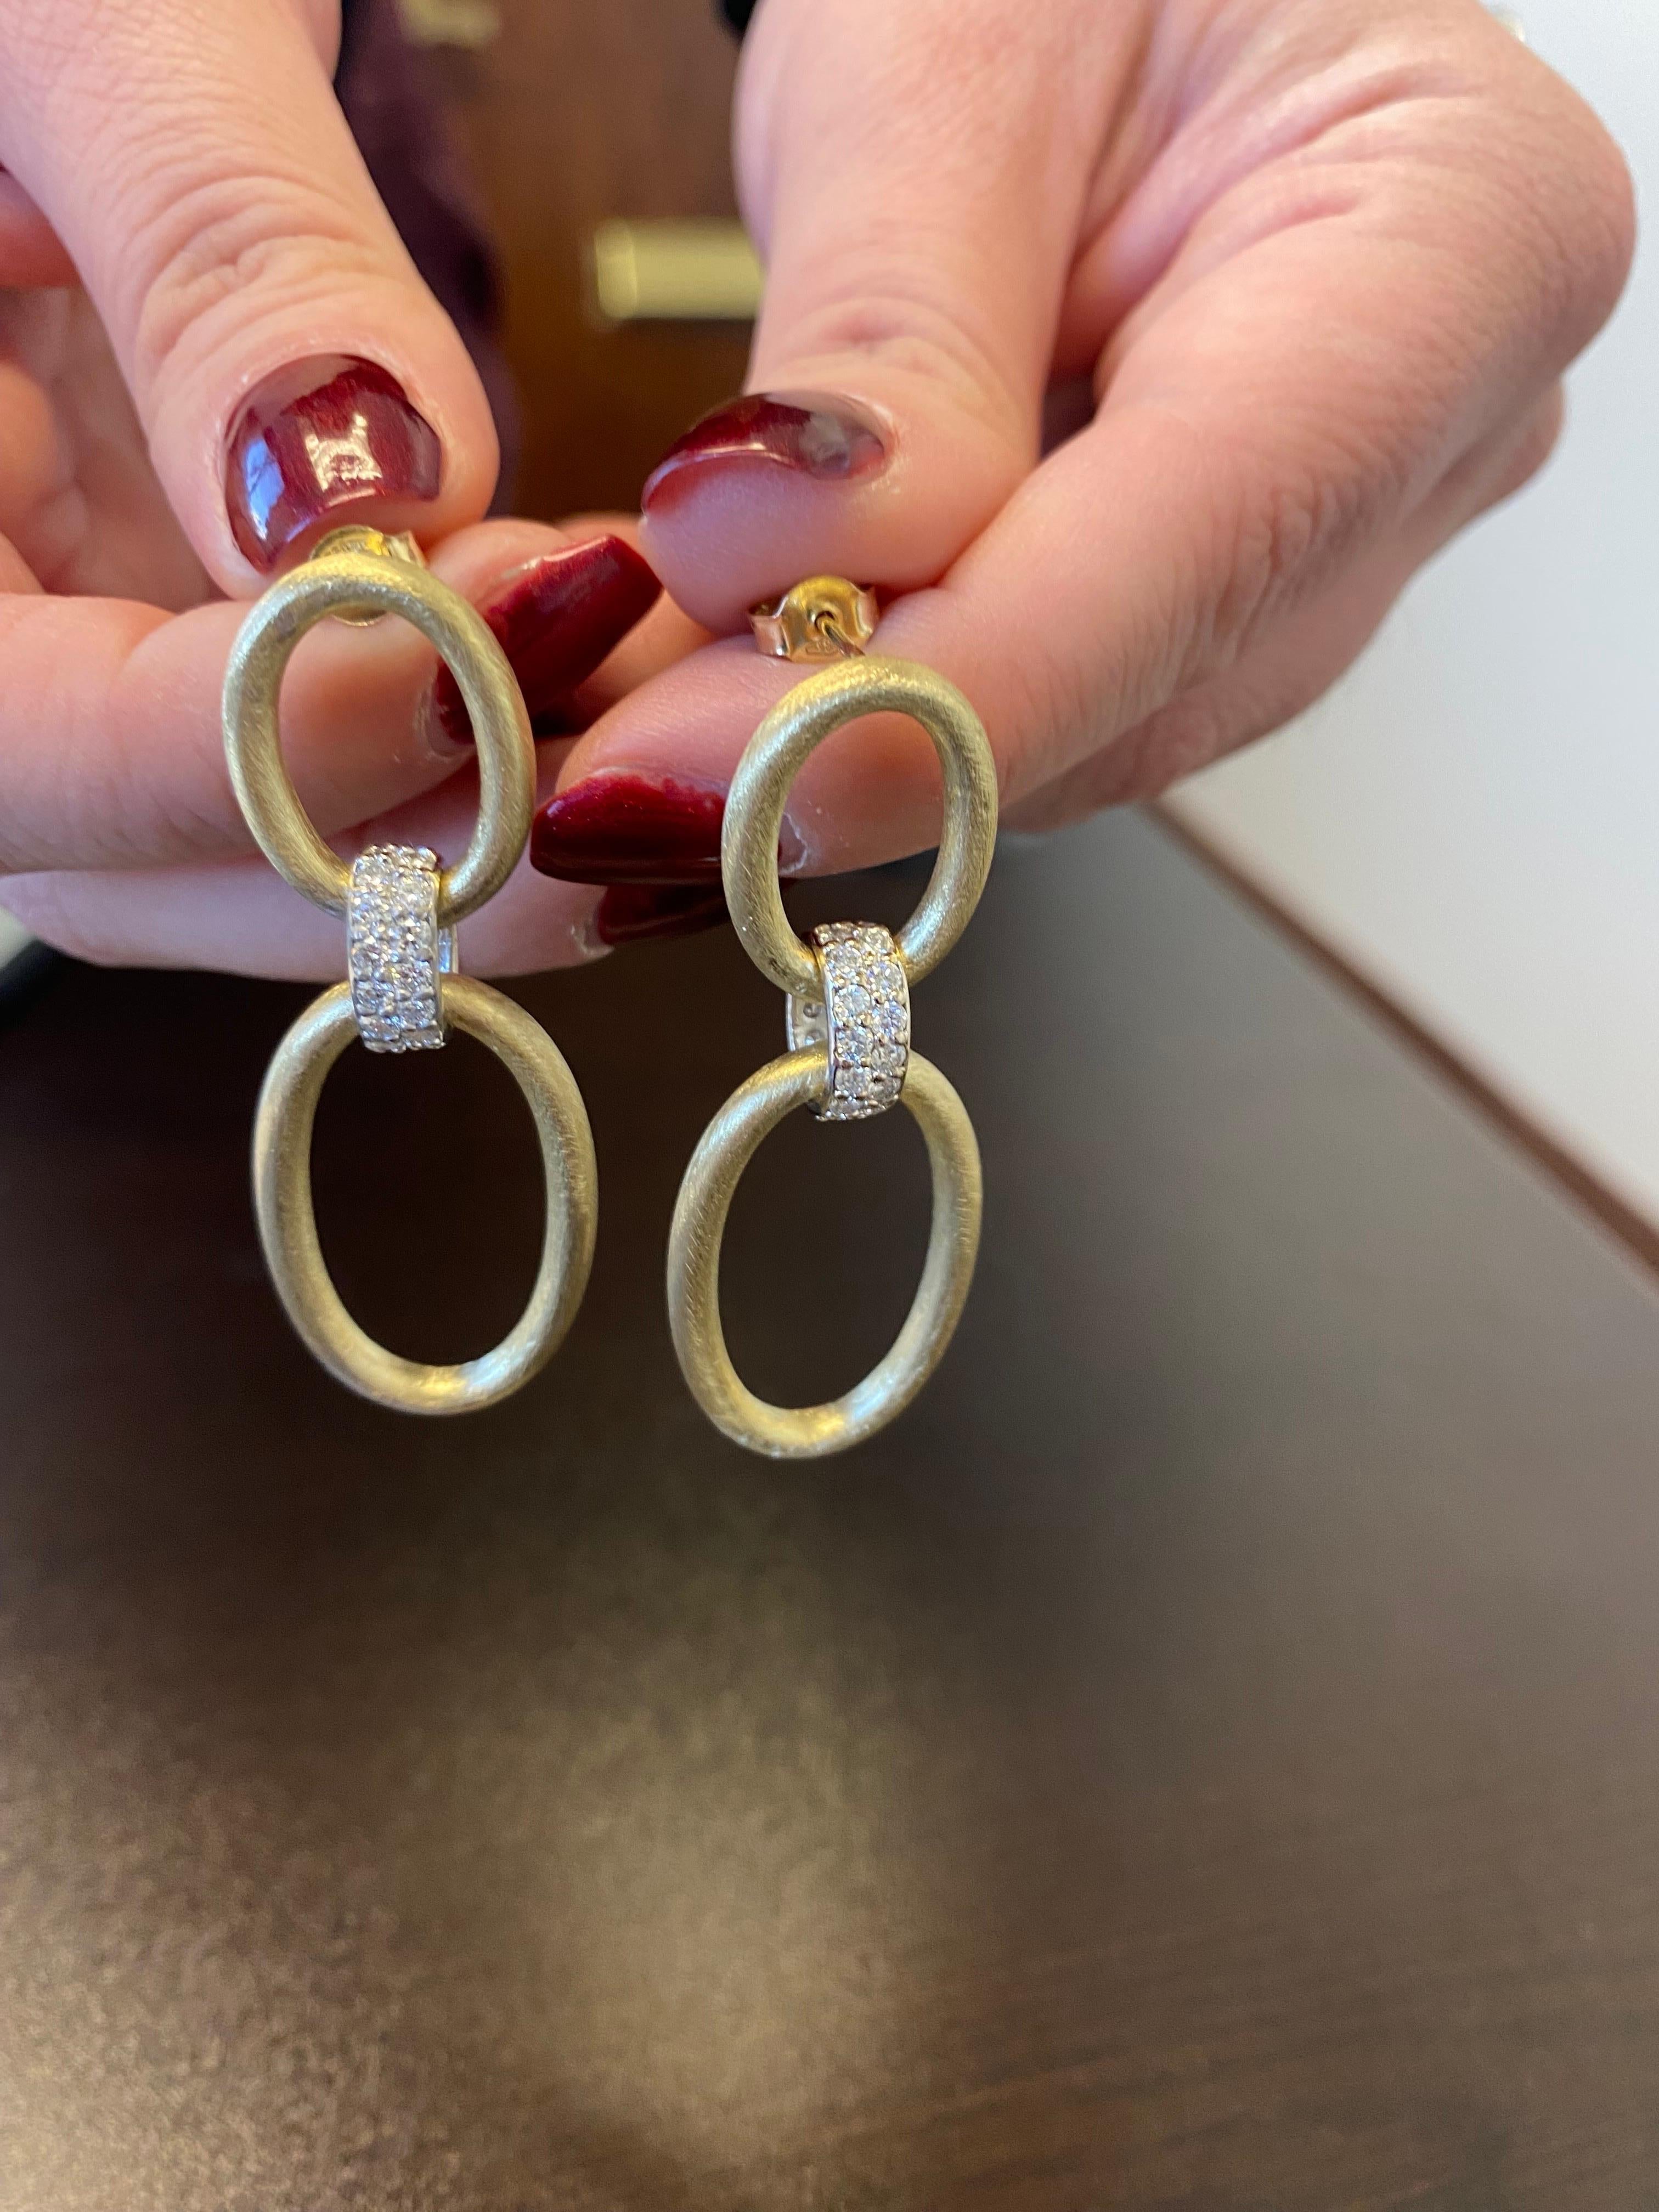 Diamond dangling set earrings set in 14K yellow and white gold 2 tone. The earrings are done in a Matte yellow gold finish. The total carat weight is 1.50. Color of the stones are G, the clarity is SI1-SI2. The earrings are manufactured in Italy.